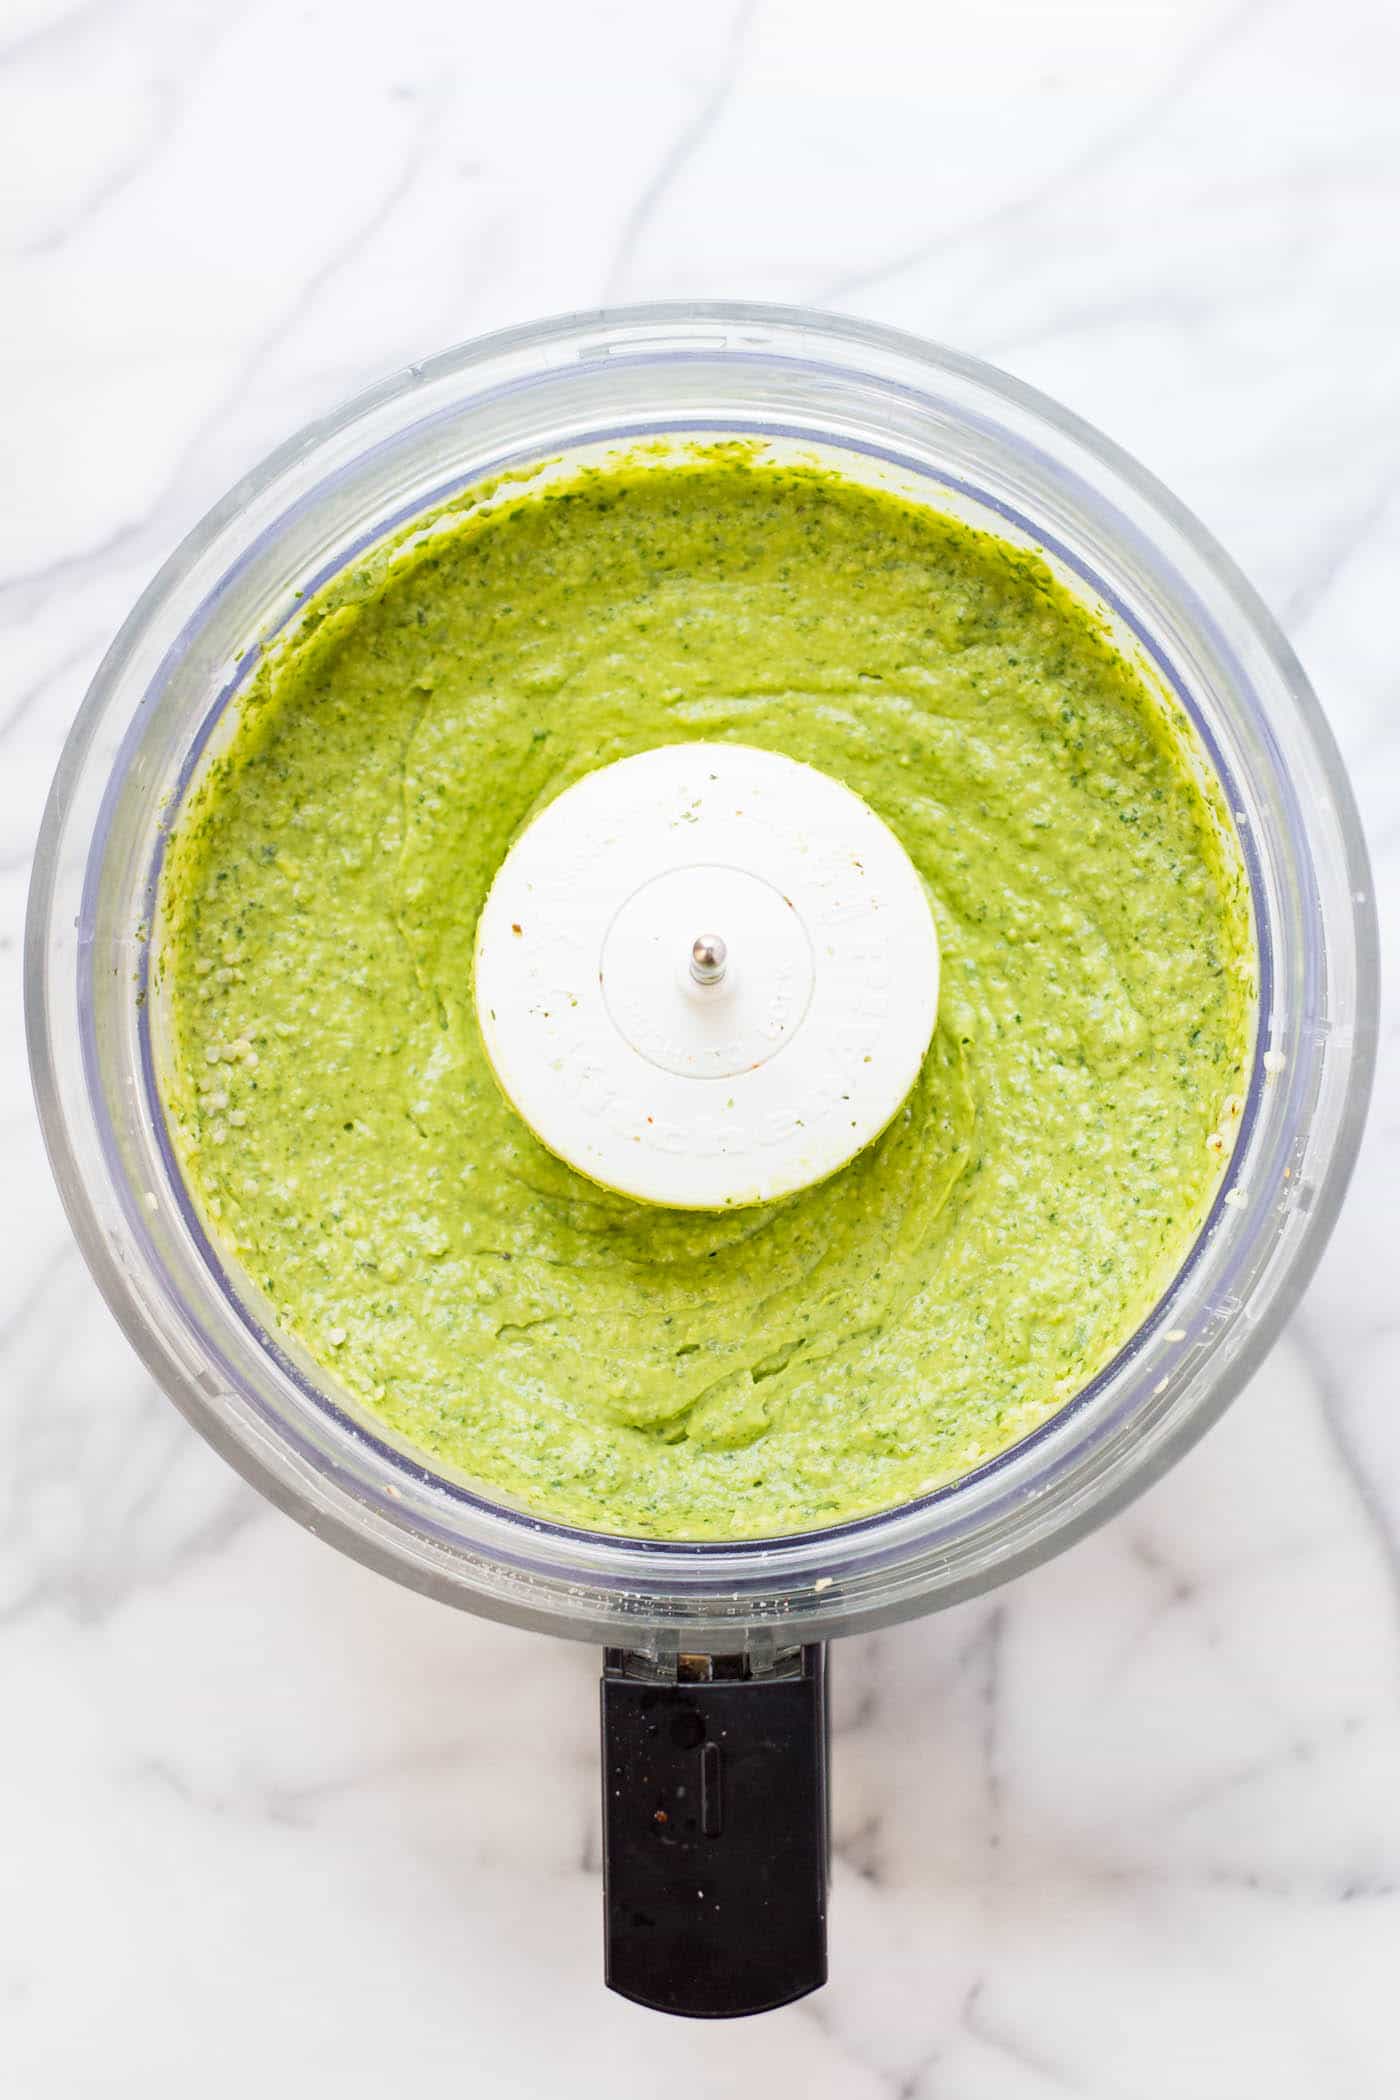 The BEST avocado pesto recipe ever!! Only requires 5 INGREDIENTS and tastes amazing!